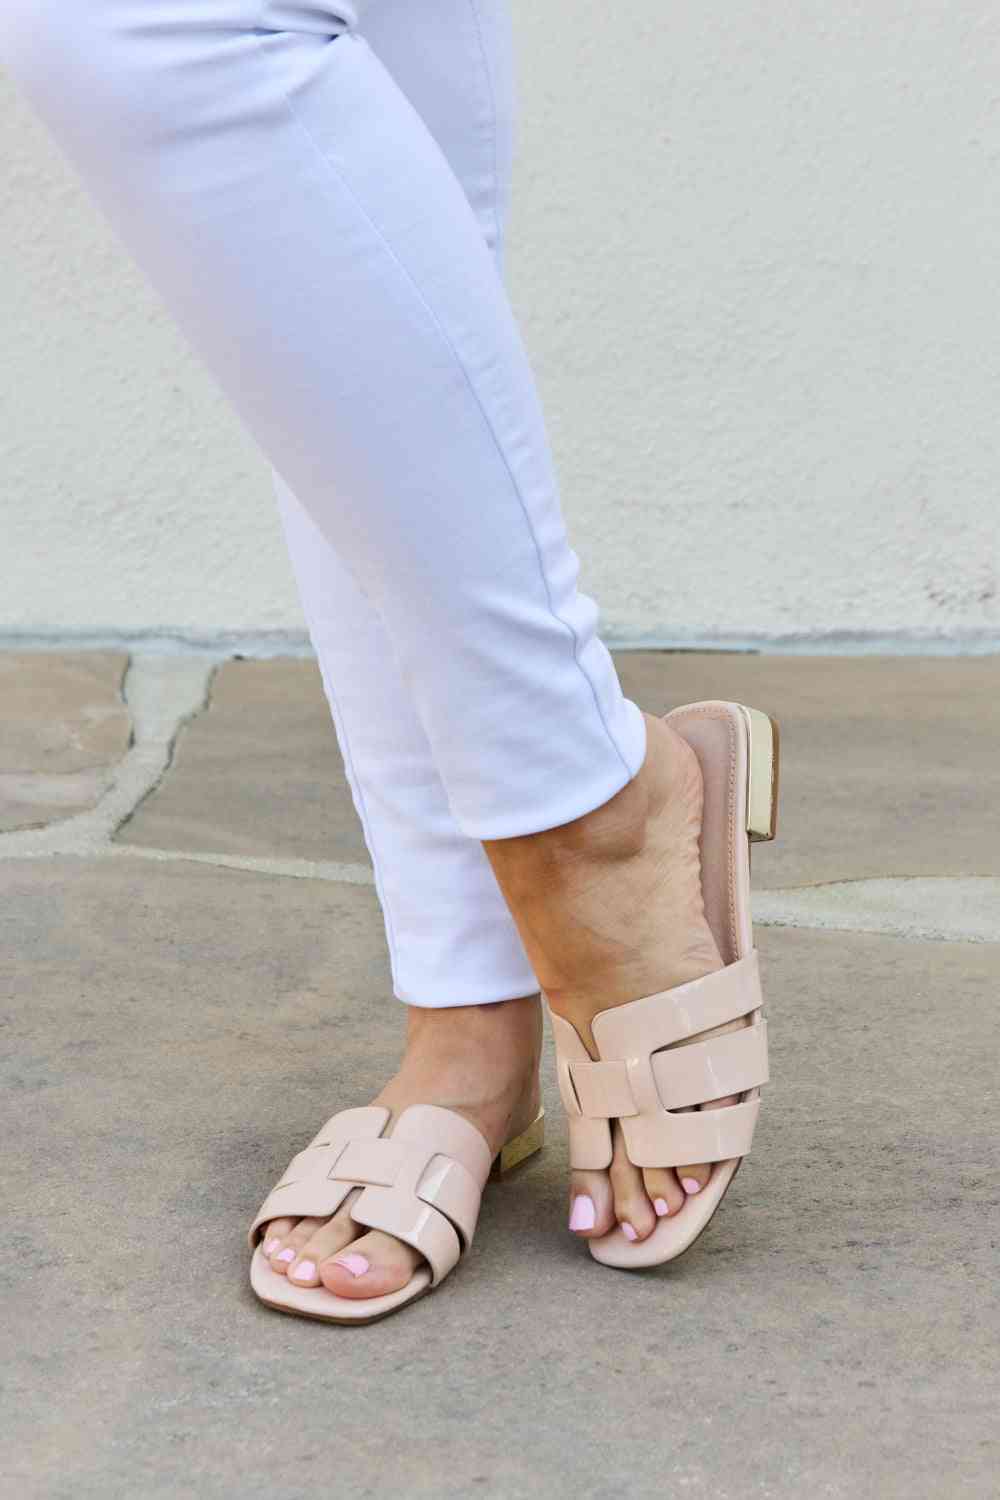 Walk It Out Slide Sandals in Nude - Beige / 6.5 - Accessories - Shoes - 1 - 2024